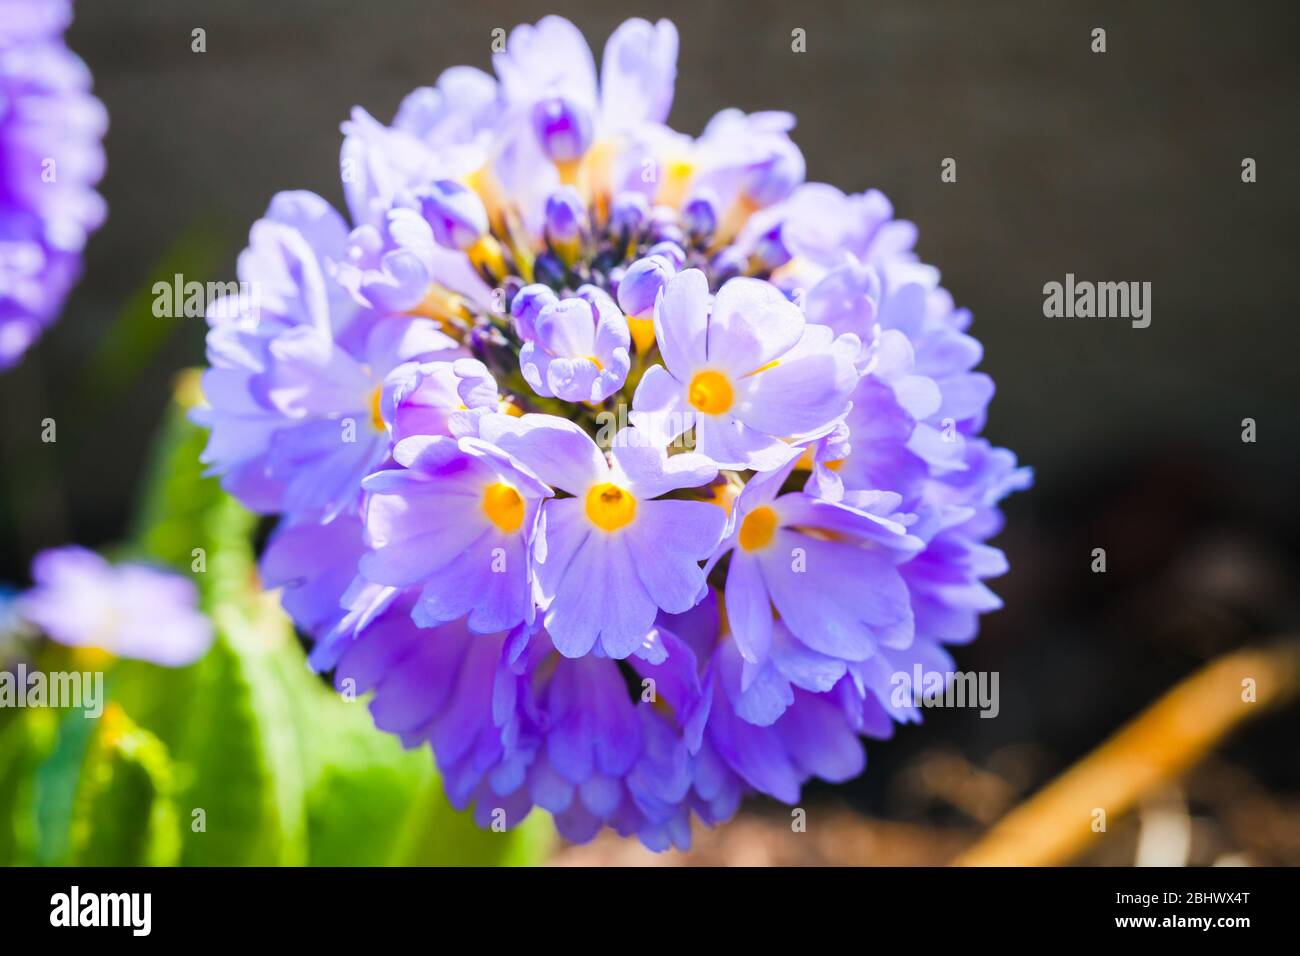 Bright spring flowers, macro photo. Primula denticulata, or the drumstick primula, flowering plant in the family Primulaceae Stock Photo